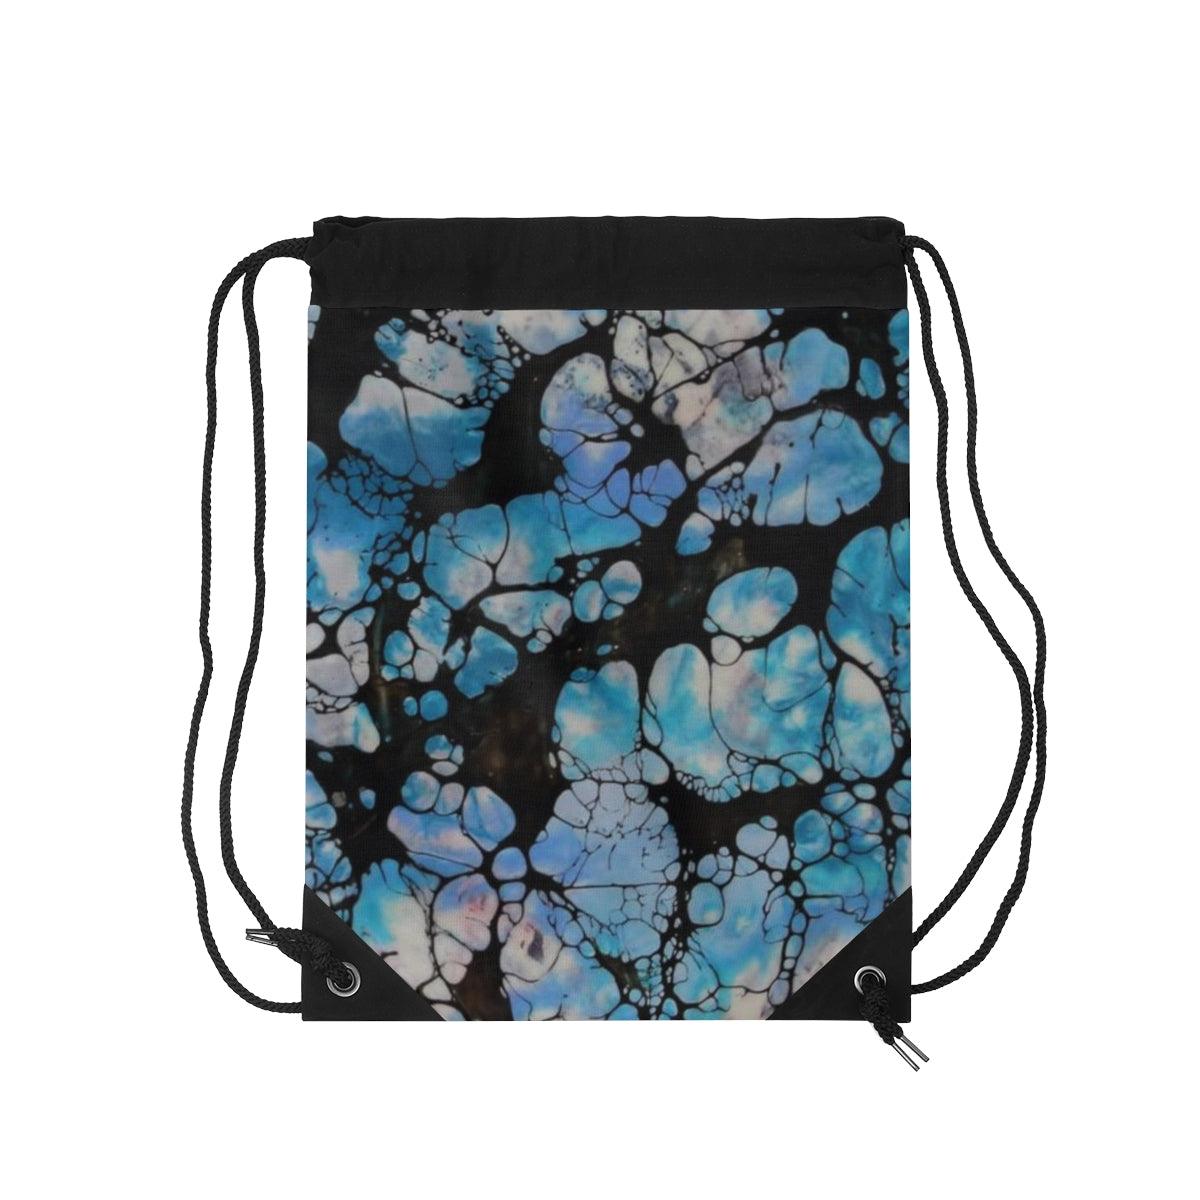 "Synapse" Drawstring Bag-Bags - Mike Giannella - Encaustic Painting - Mixed Media Artist - Art Prints